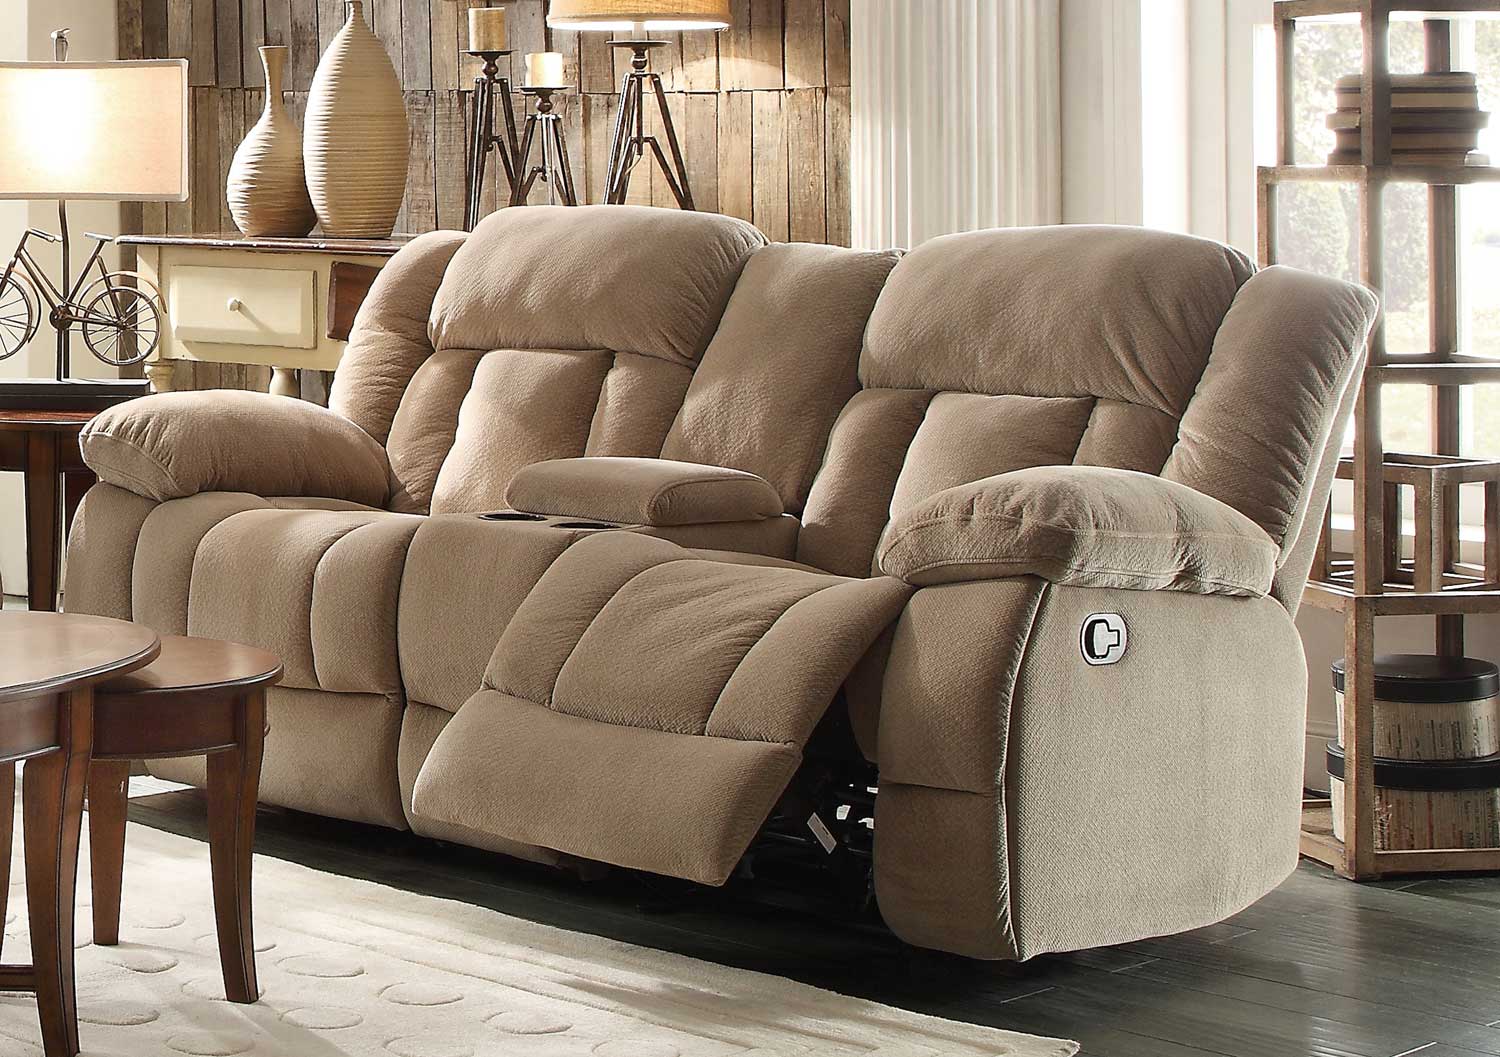 Homelegance Laurelton Double Glider Reclining Love Seat with Center Console - Taupe Fabric